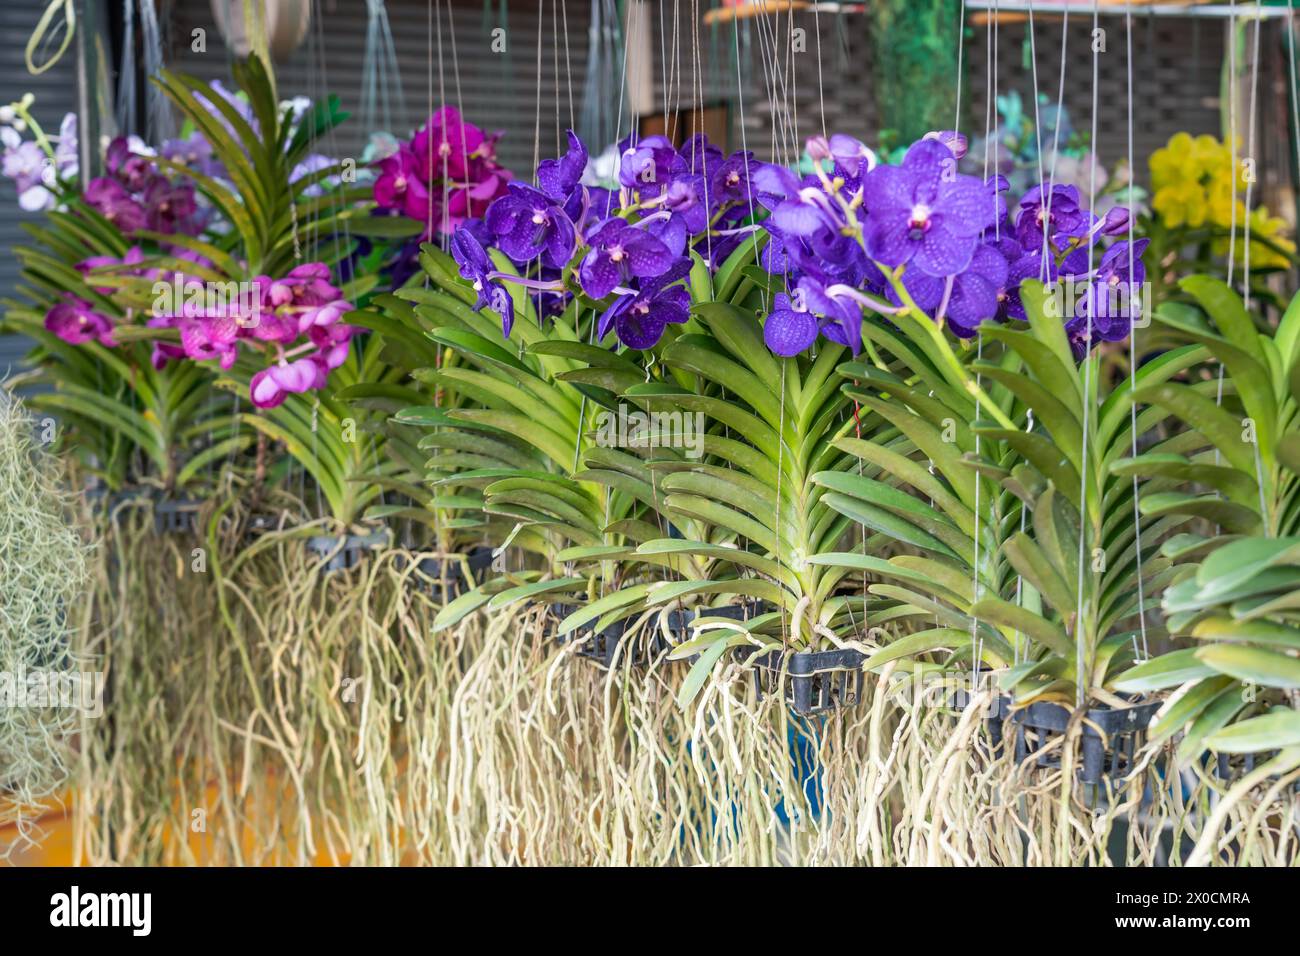 Beautiful vanda orchidee kaufen orchids with beautiful flowers and green leaves. Many different colors on display in a garden center. Stock Photo